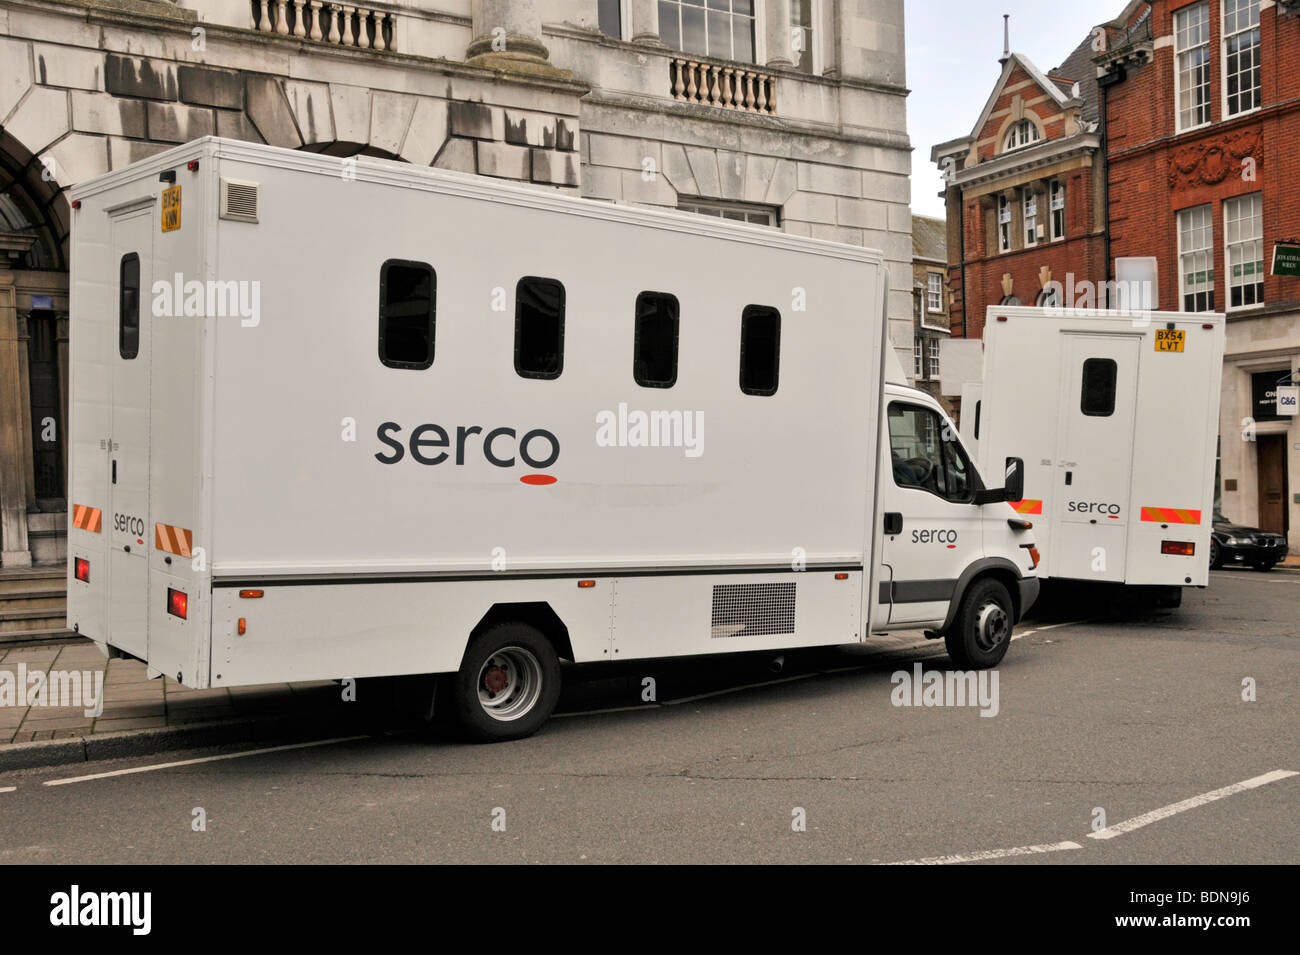 Two serco vans parked in front of a building in london, england - stock image.